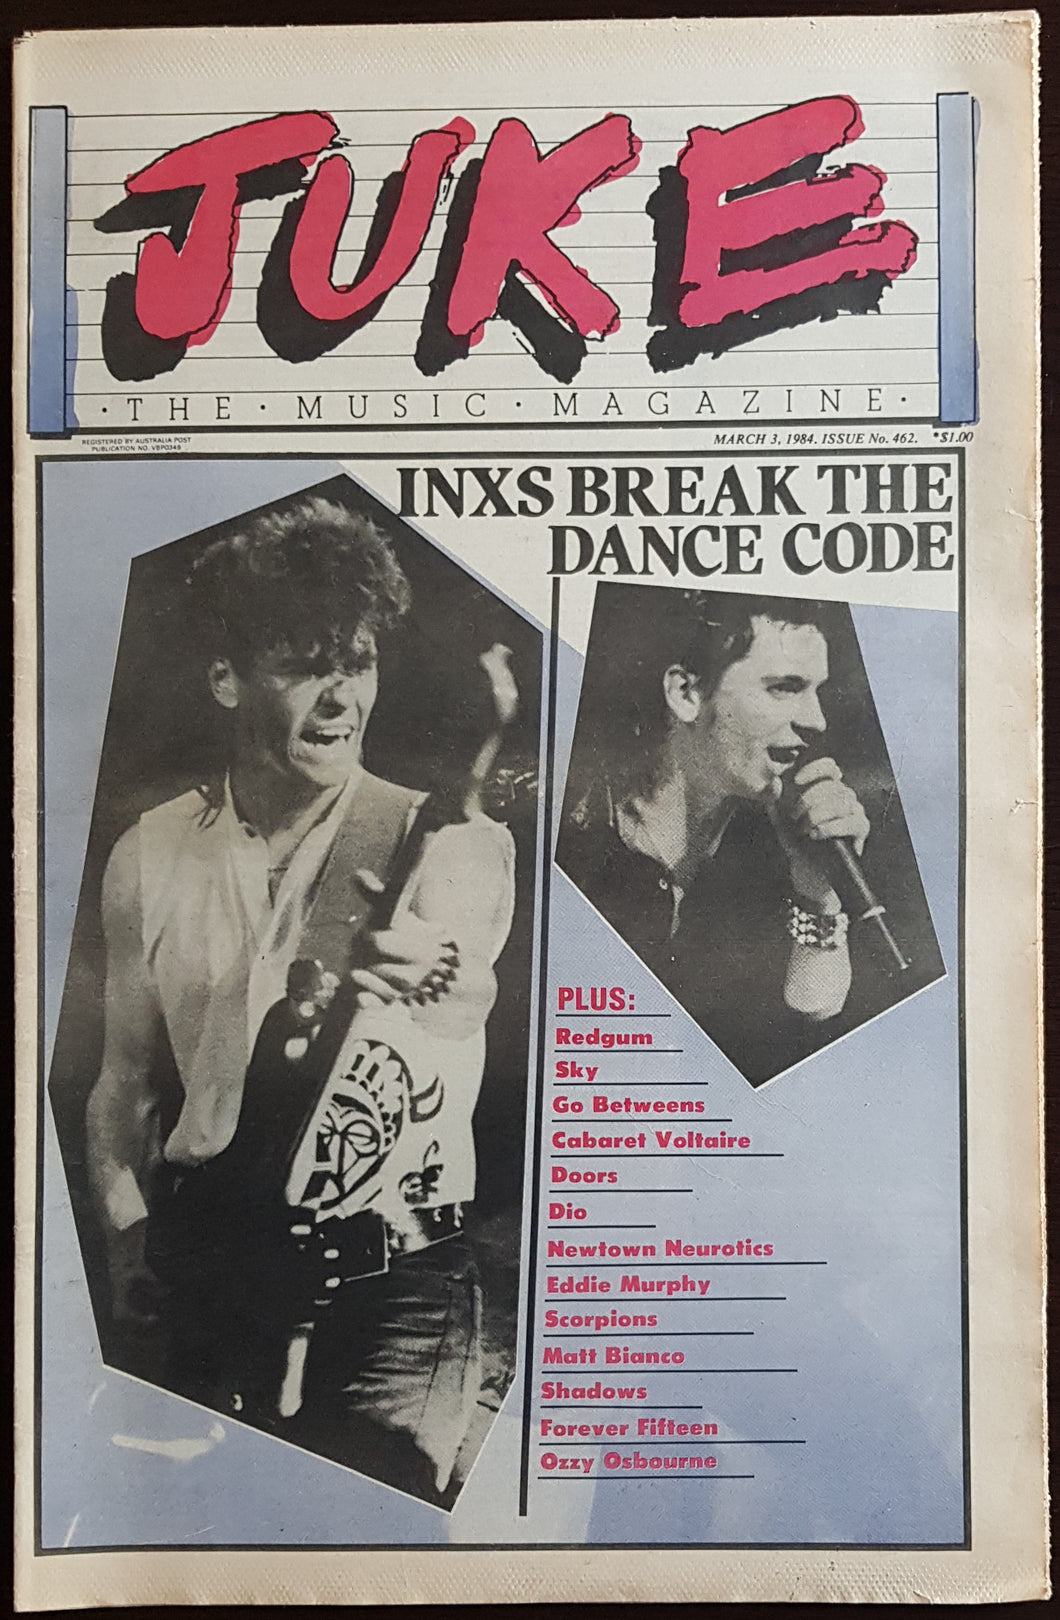 INXS - Juke March 3 1984. Issue No.462